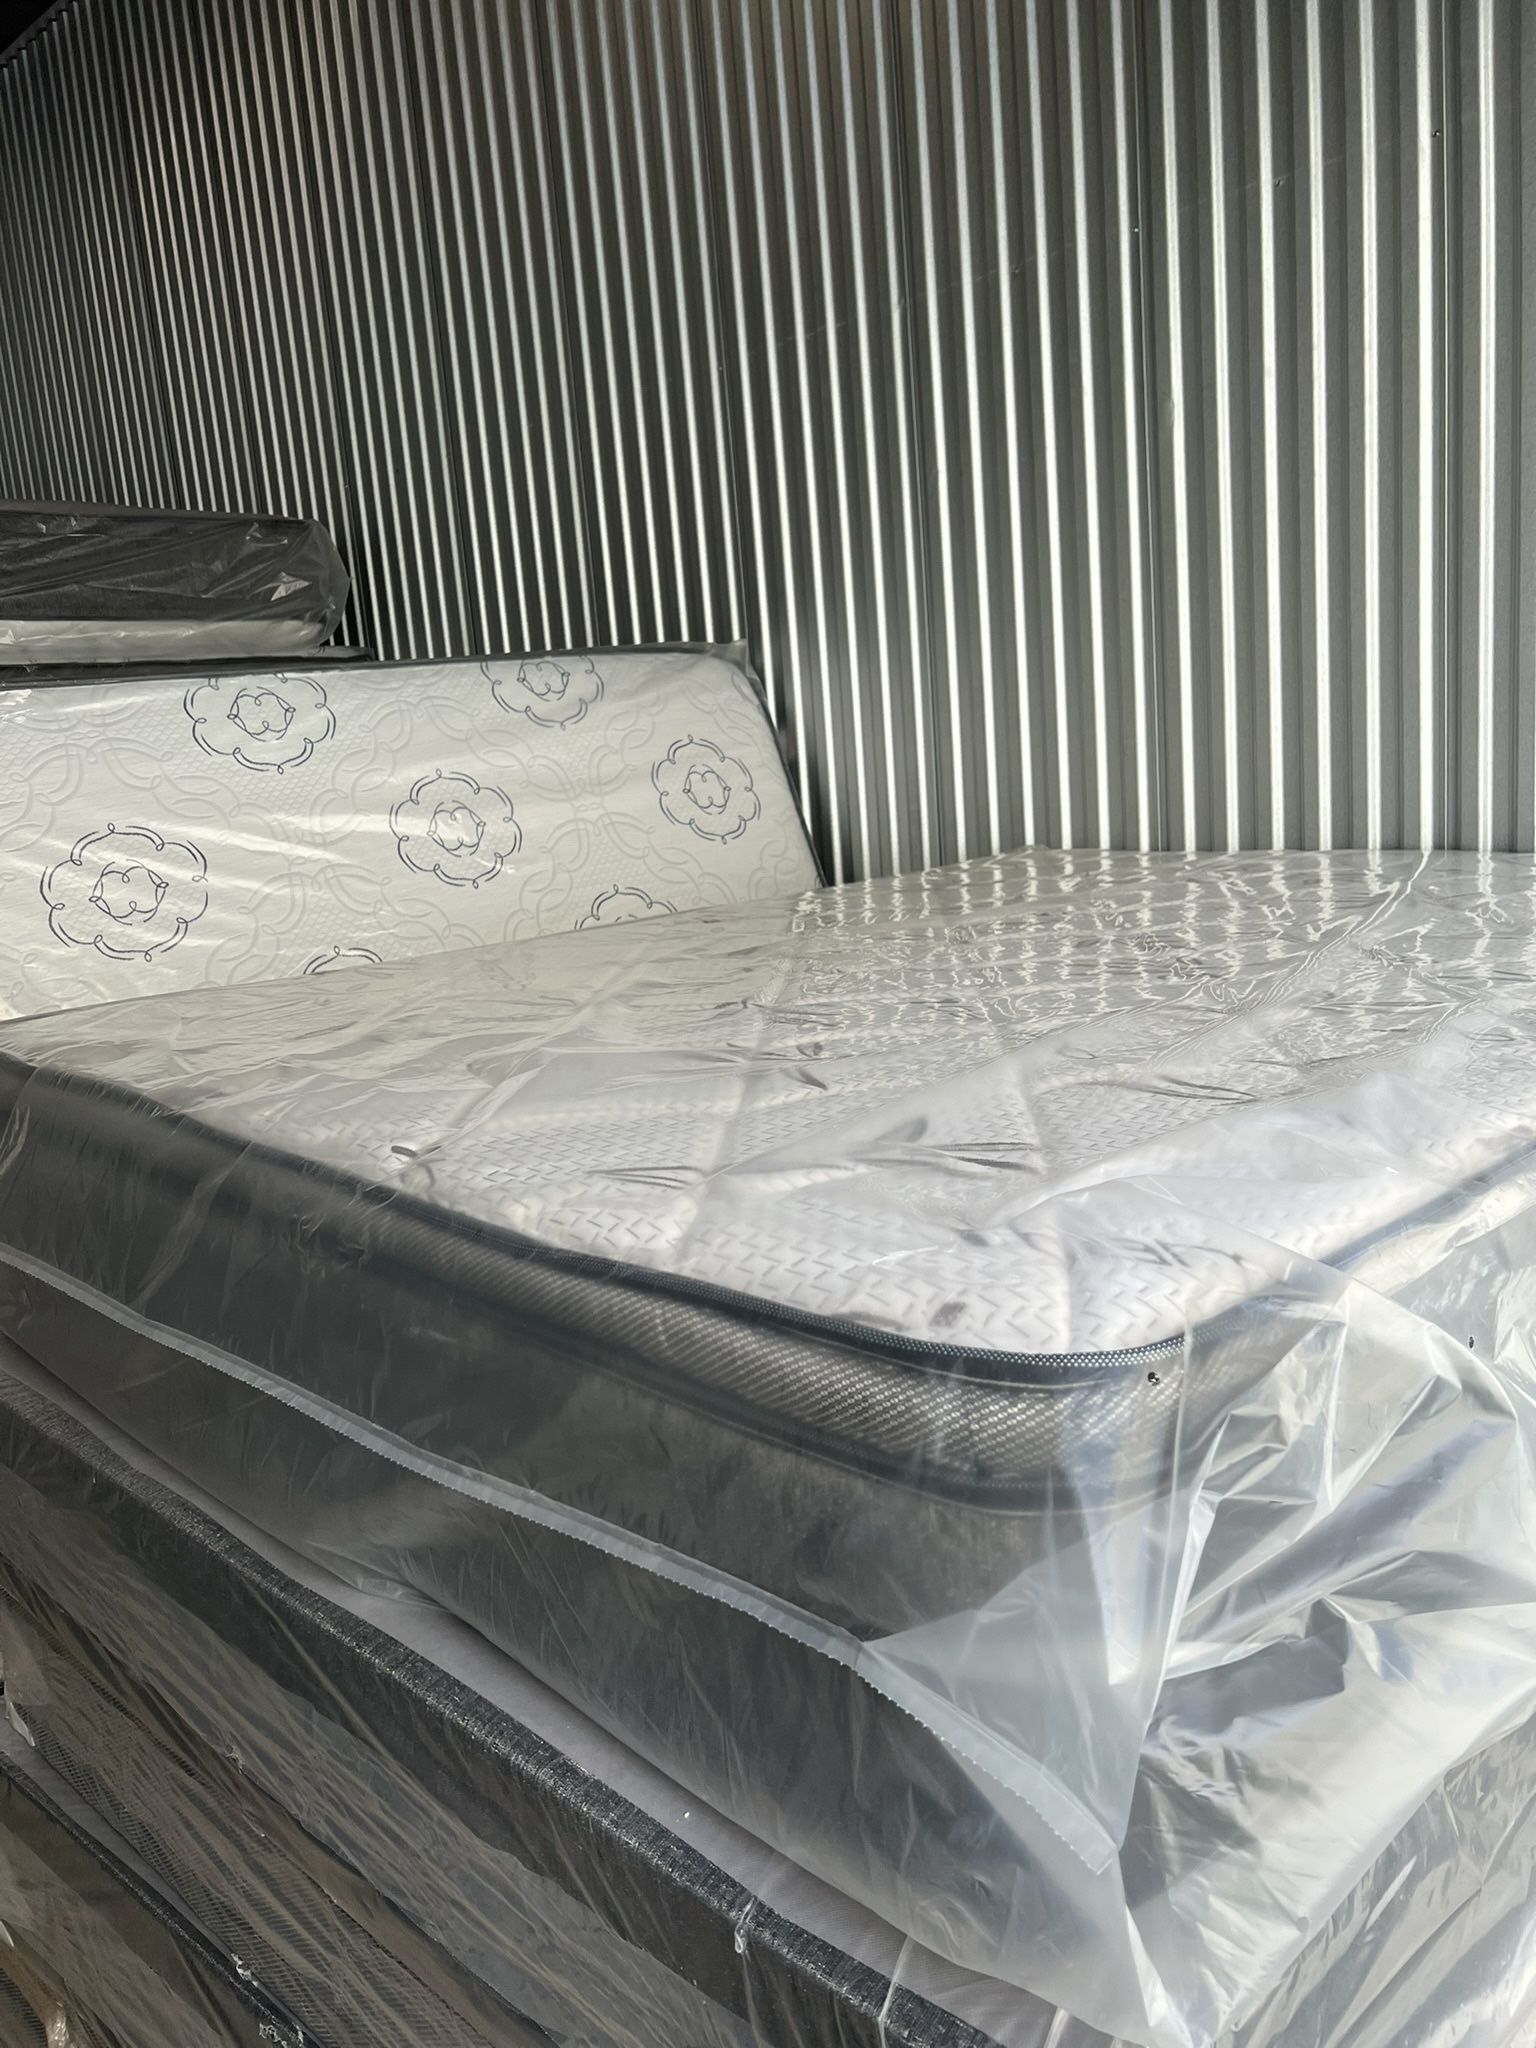   Mattresses: twin, full , queen regular ,  Colchon Nuevo Colchones plush or pillow top available cama bed mattress 